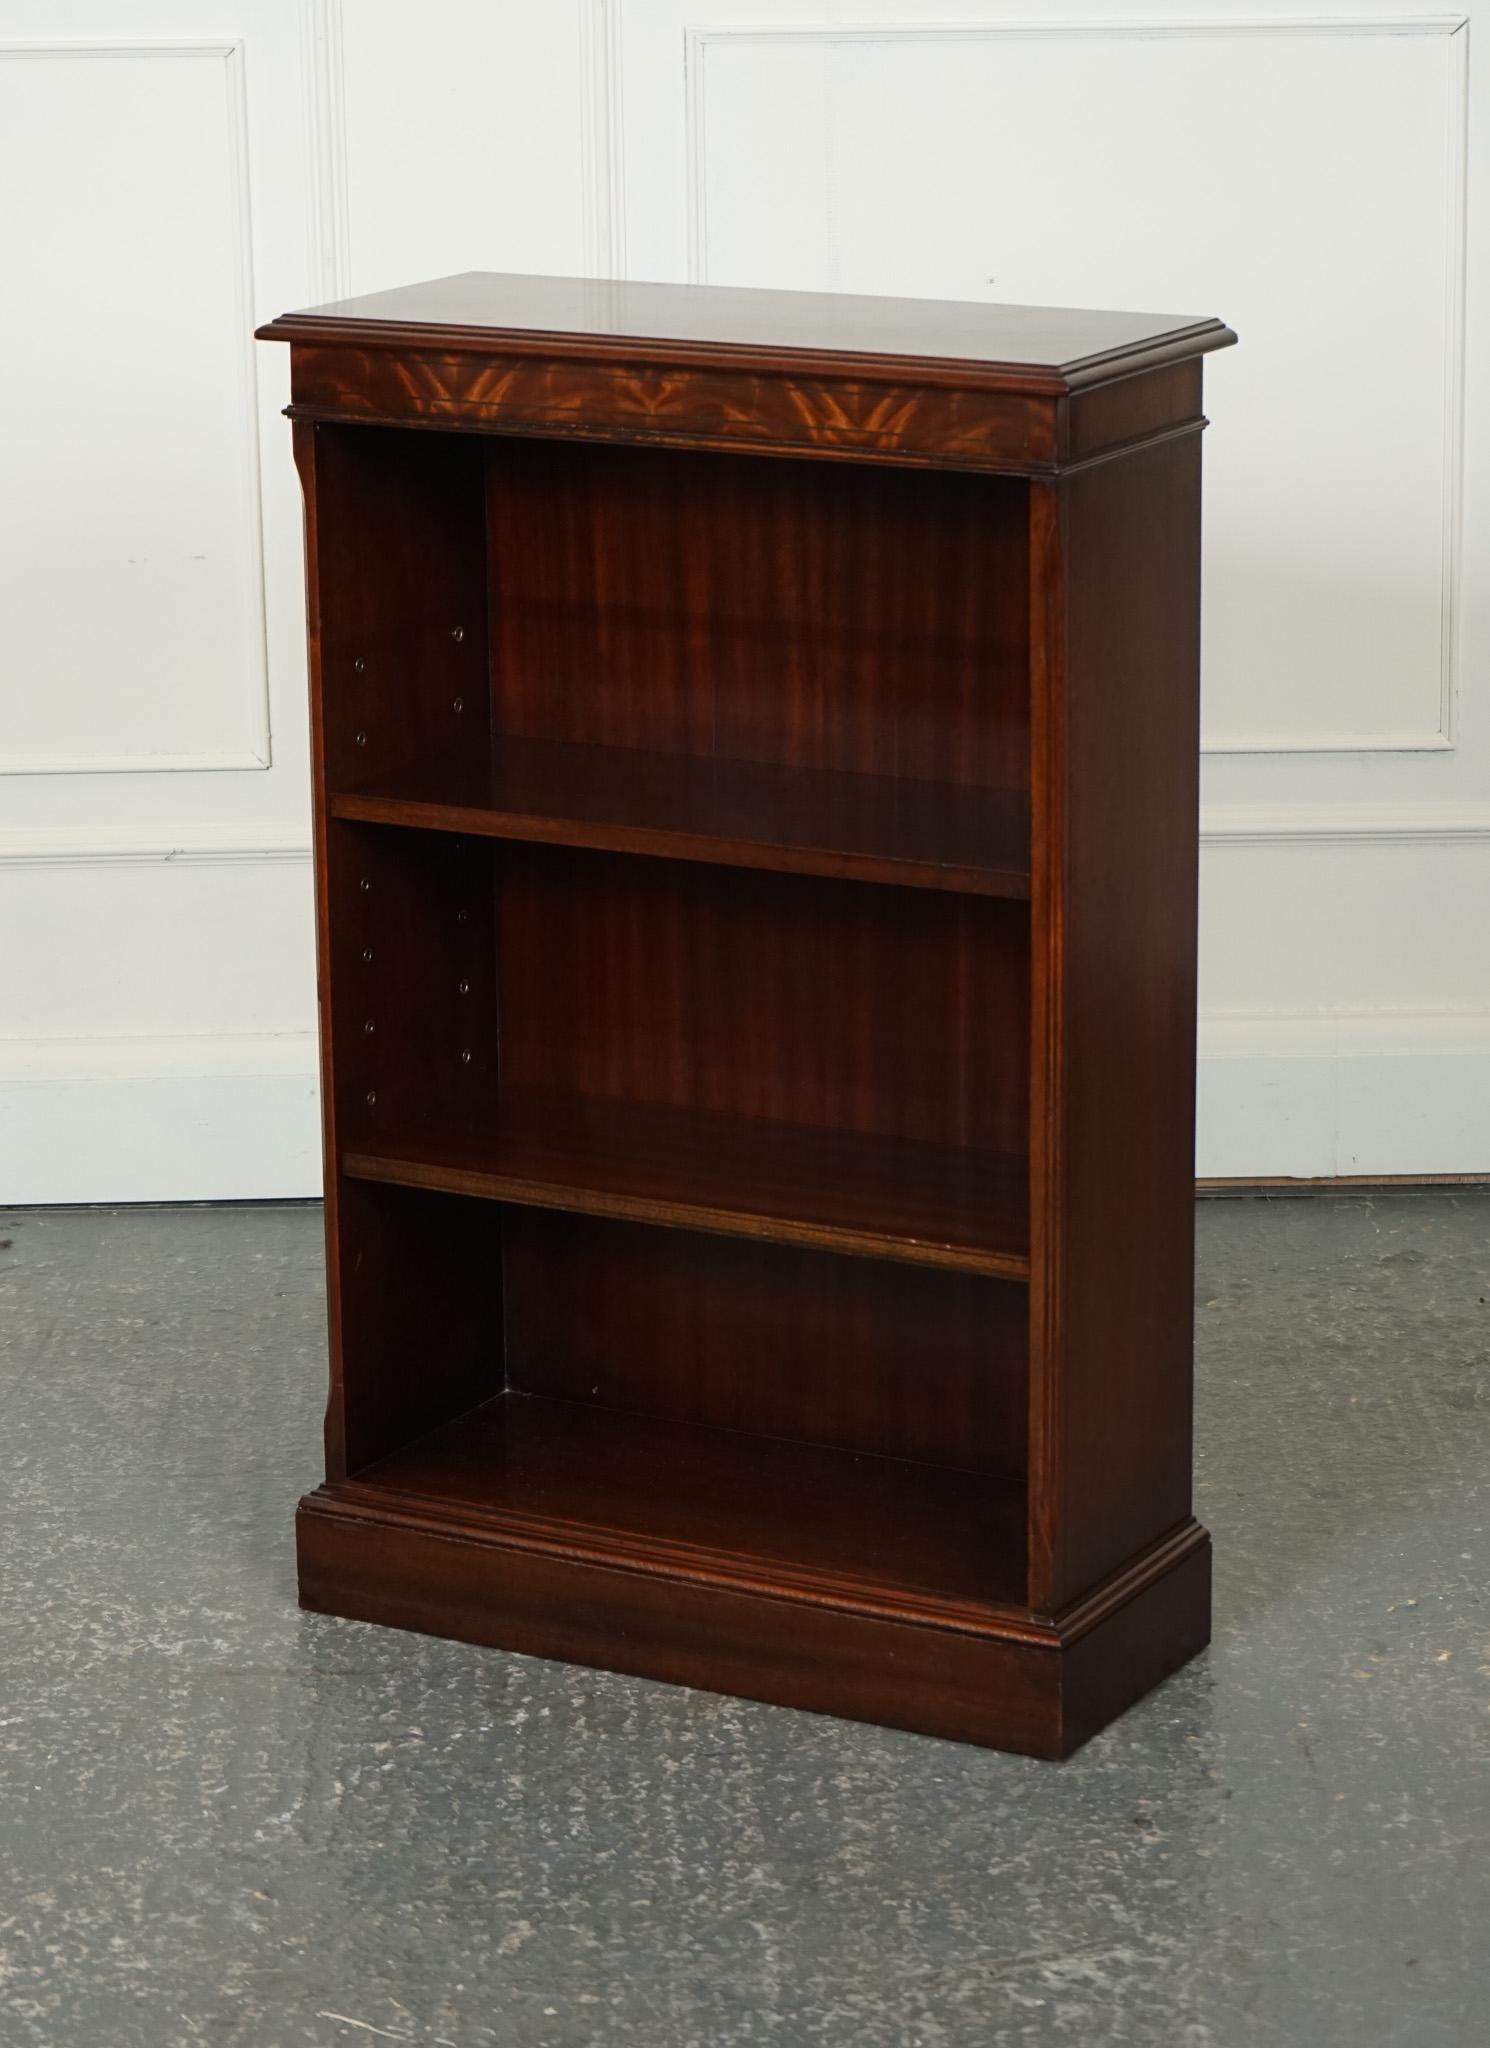 
We are delighted to offer for sale this Bevan Funnell Georgian Style Open Dwarf Bookcase

The Bevan Funnell Georgian Style Open Dwarf Bookcase is a beautiful piece of furniture crafted in the Georgian style. It features an open design with